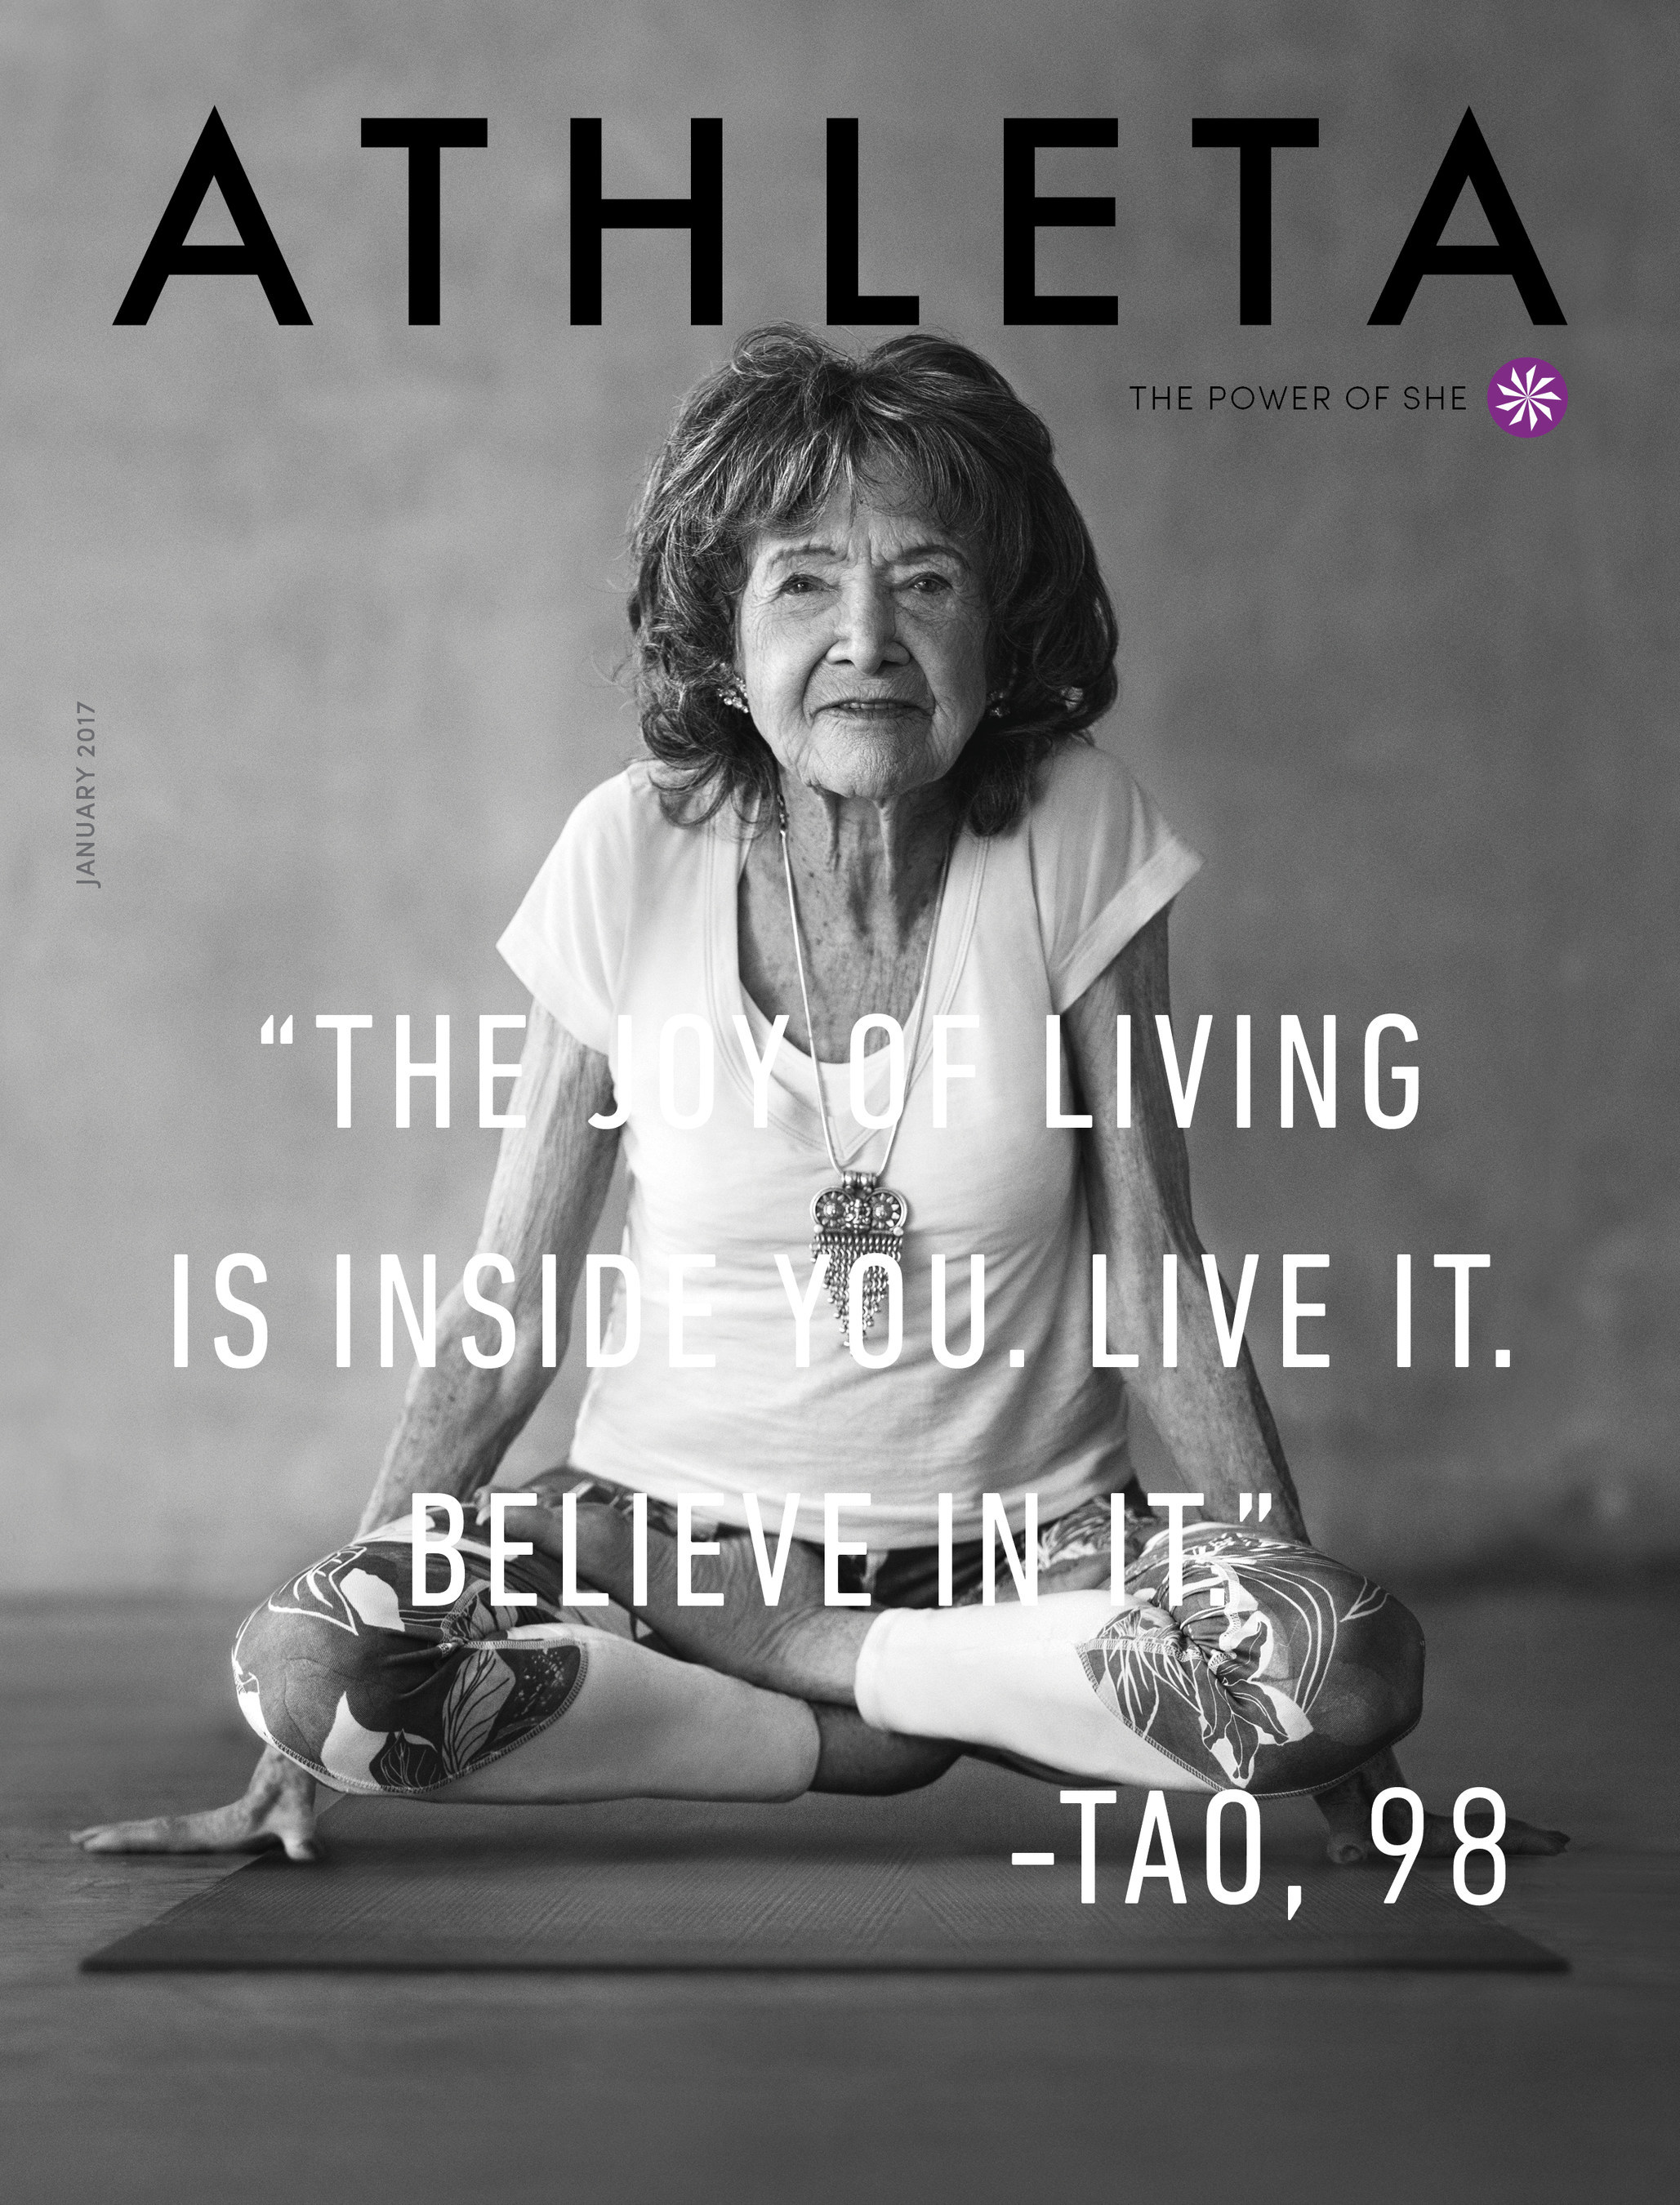 Athleta's New Launch Is The Inclusivity Push I've Been Waiting For